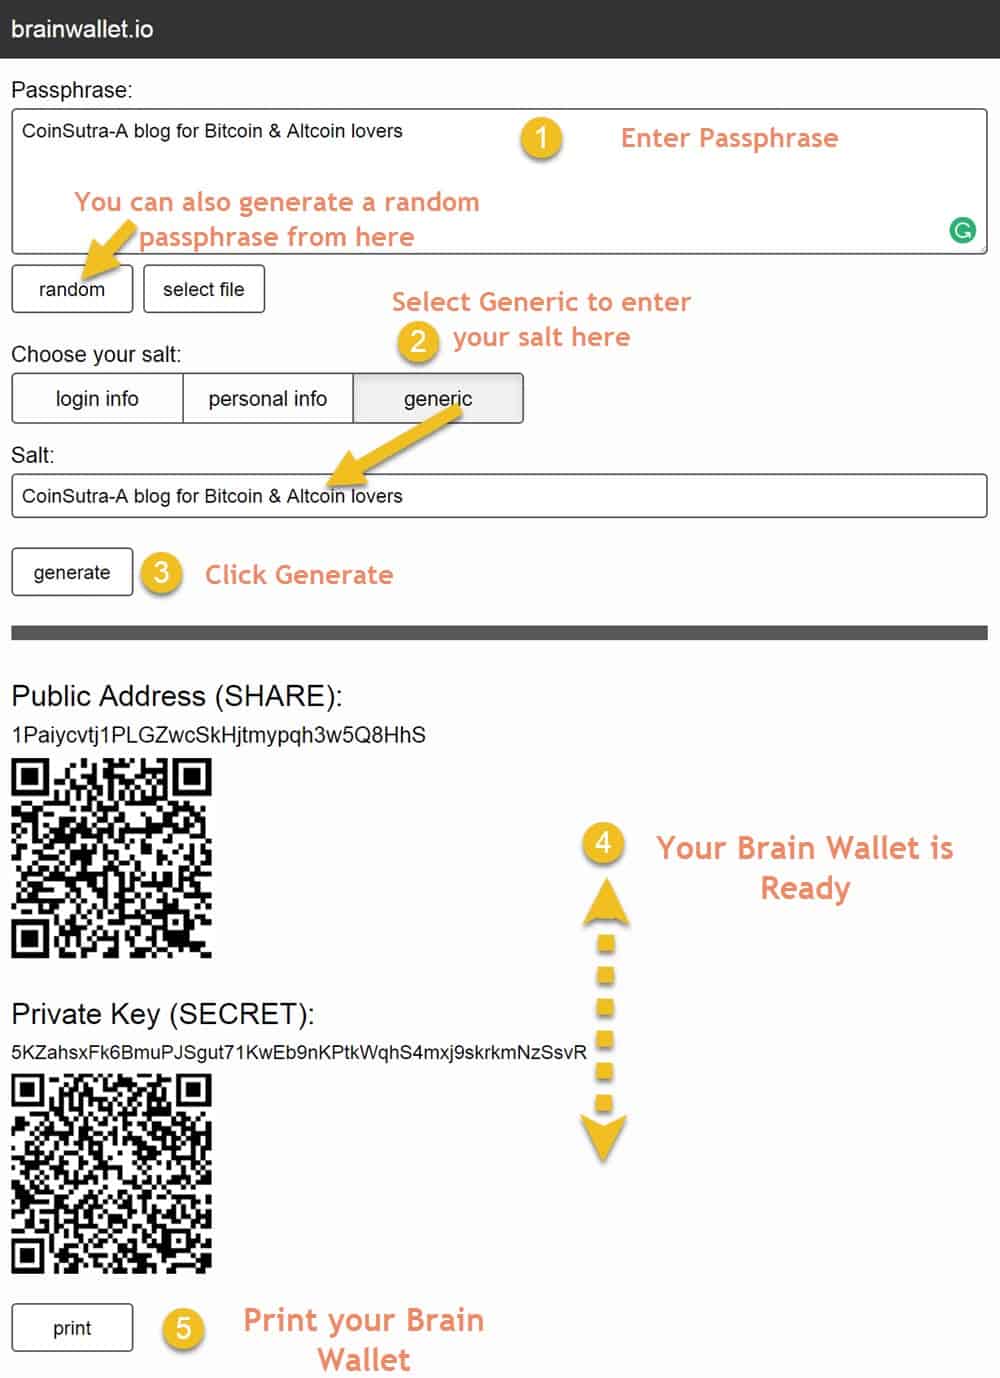 New Cracking Tool Exposes Major Flaw in Bitcoin Brainwallets